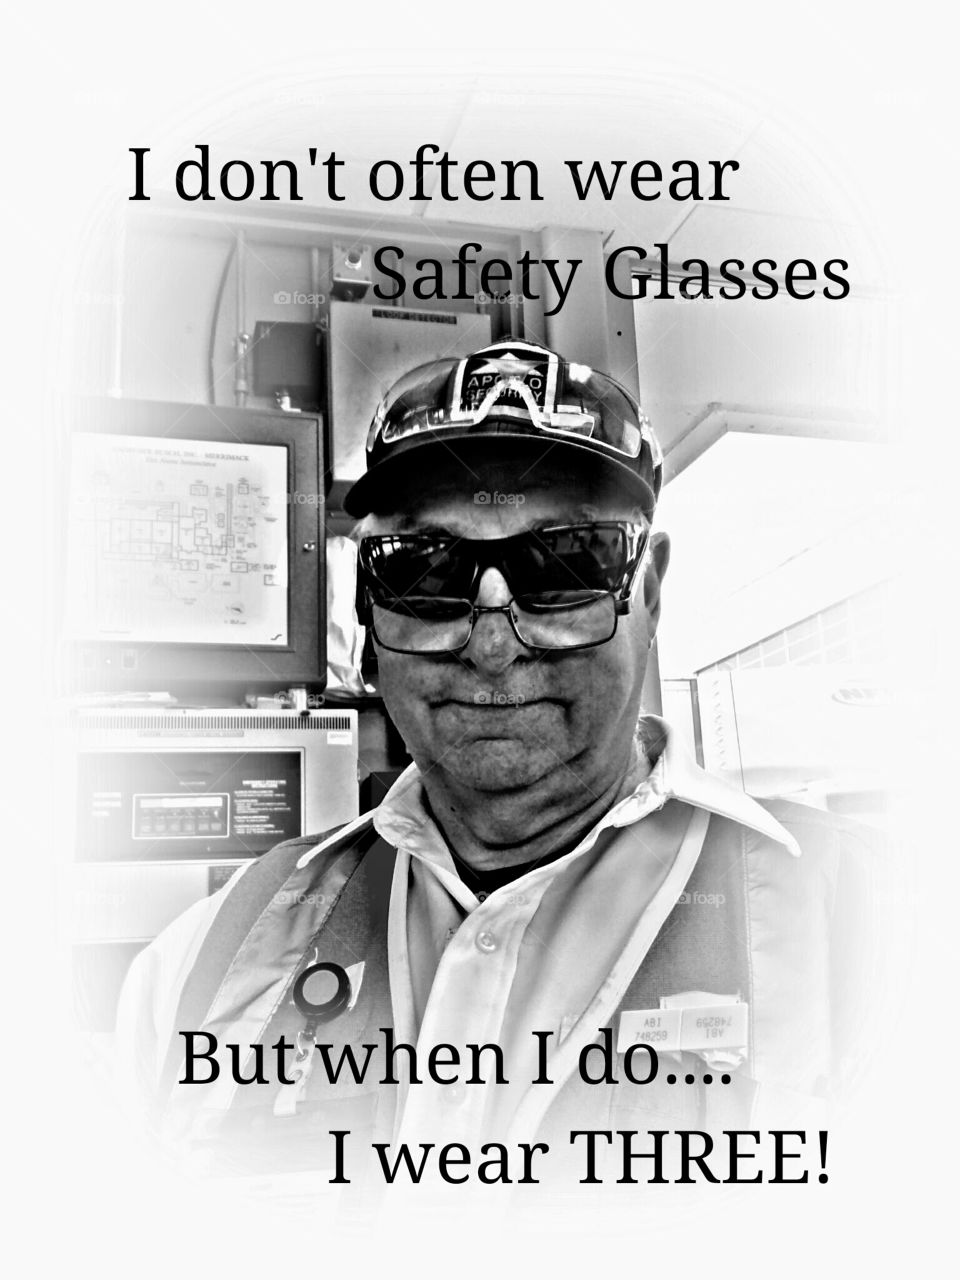 Safety Man. I don't always wear safety glasses... but when I do... I wear 3!!!! Safety humor at the workplace.